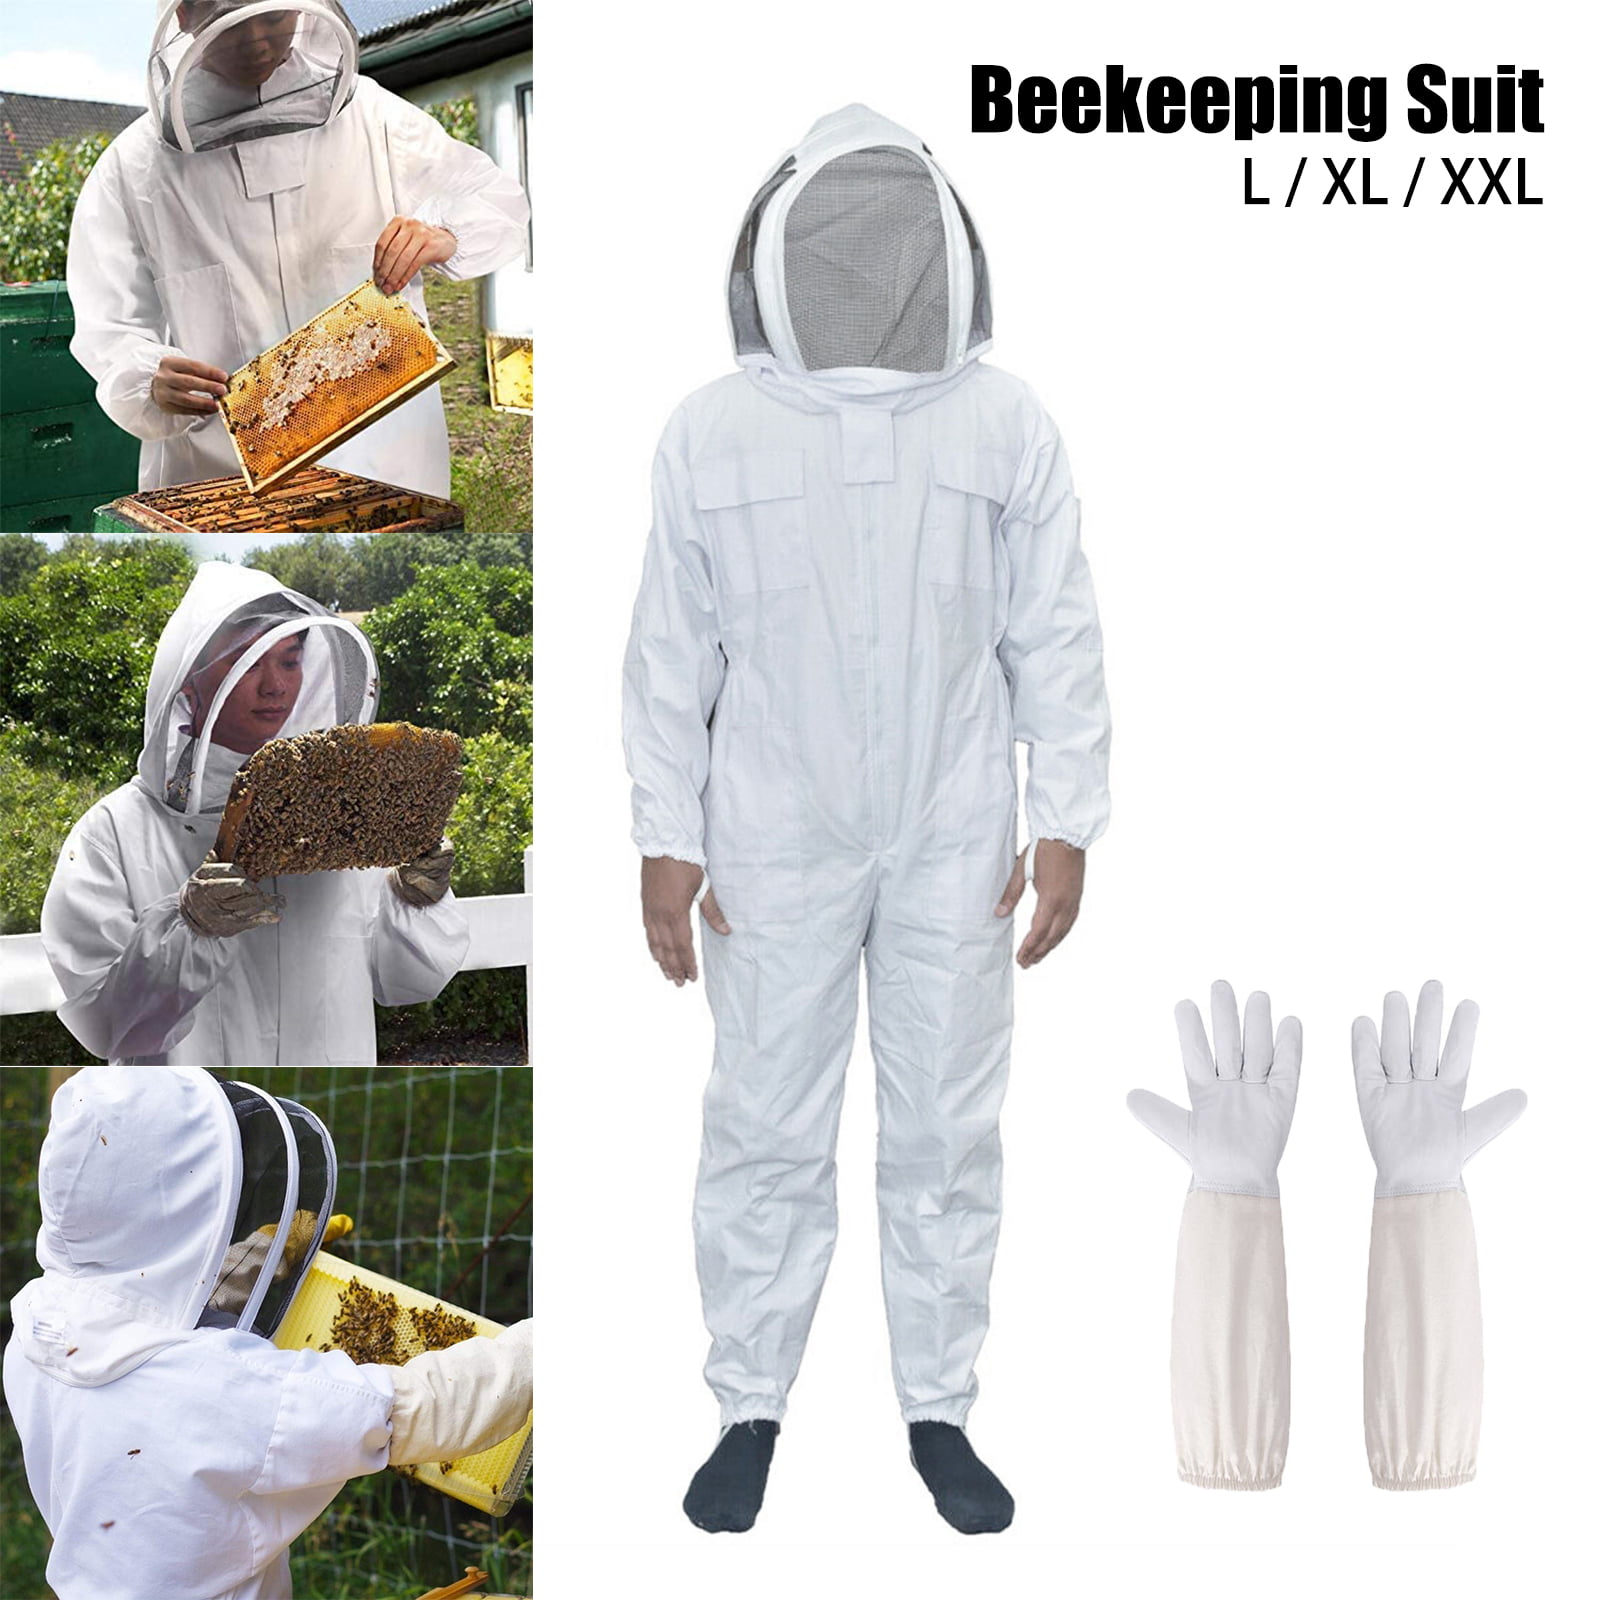 Equipment Full Body Cotton Beekeeping suit Clothes Veil Hood Protective XL Size 